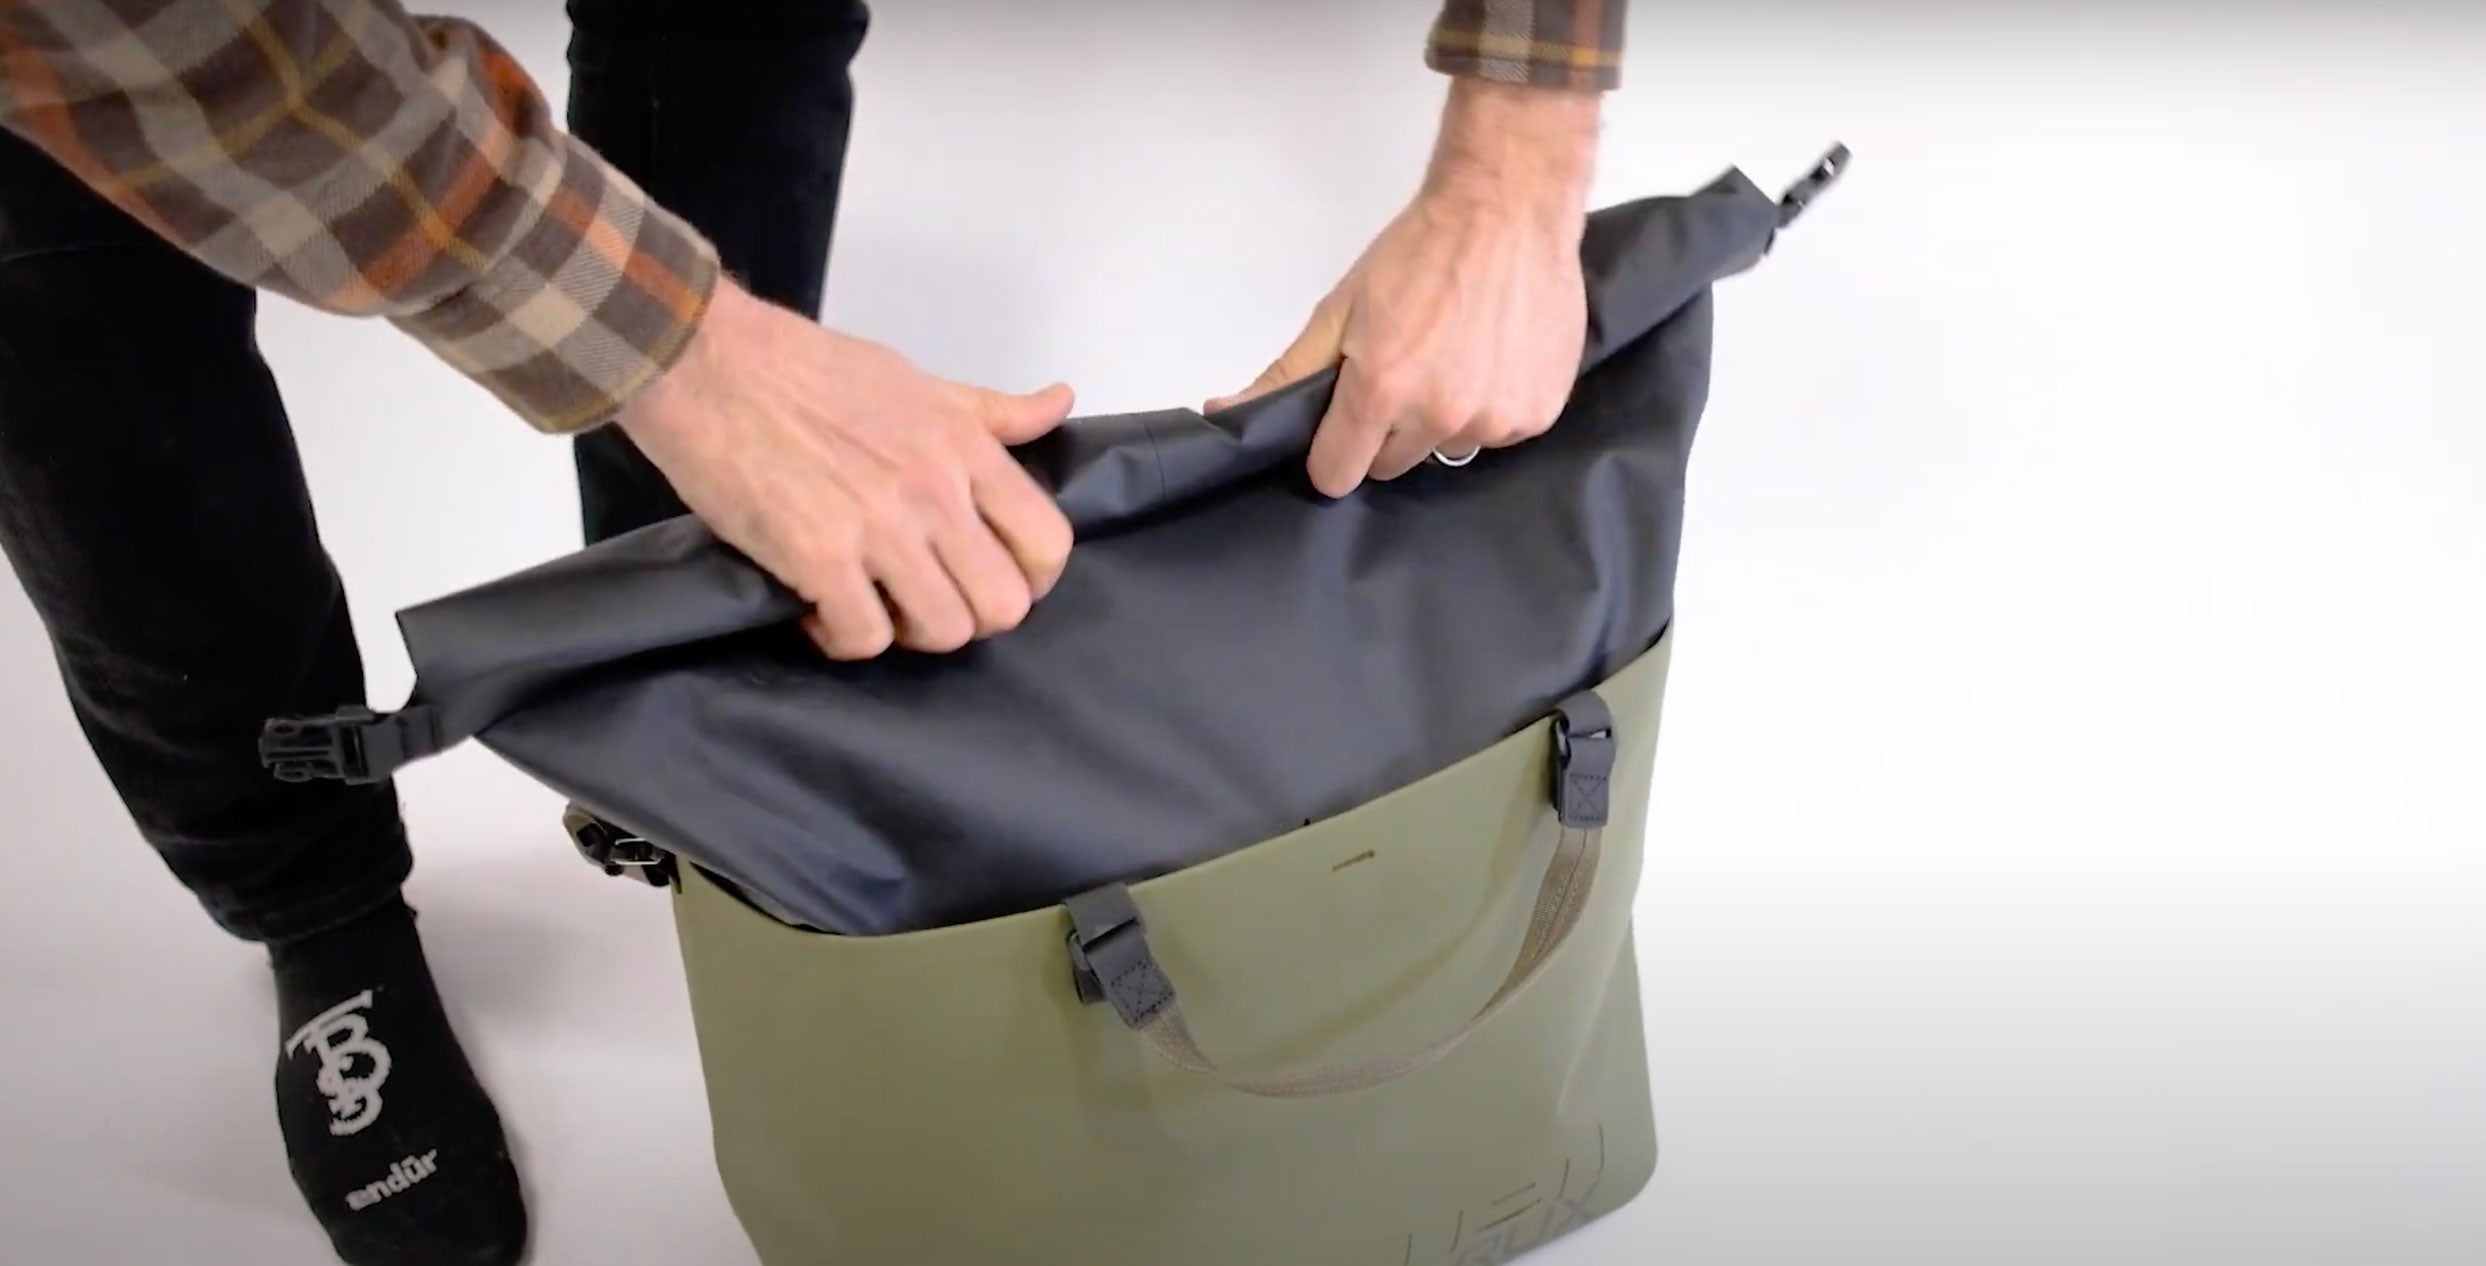 How to use your RUX Waterproof Bag